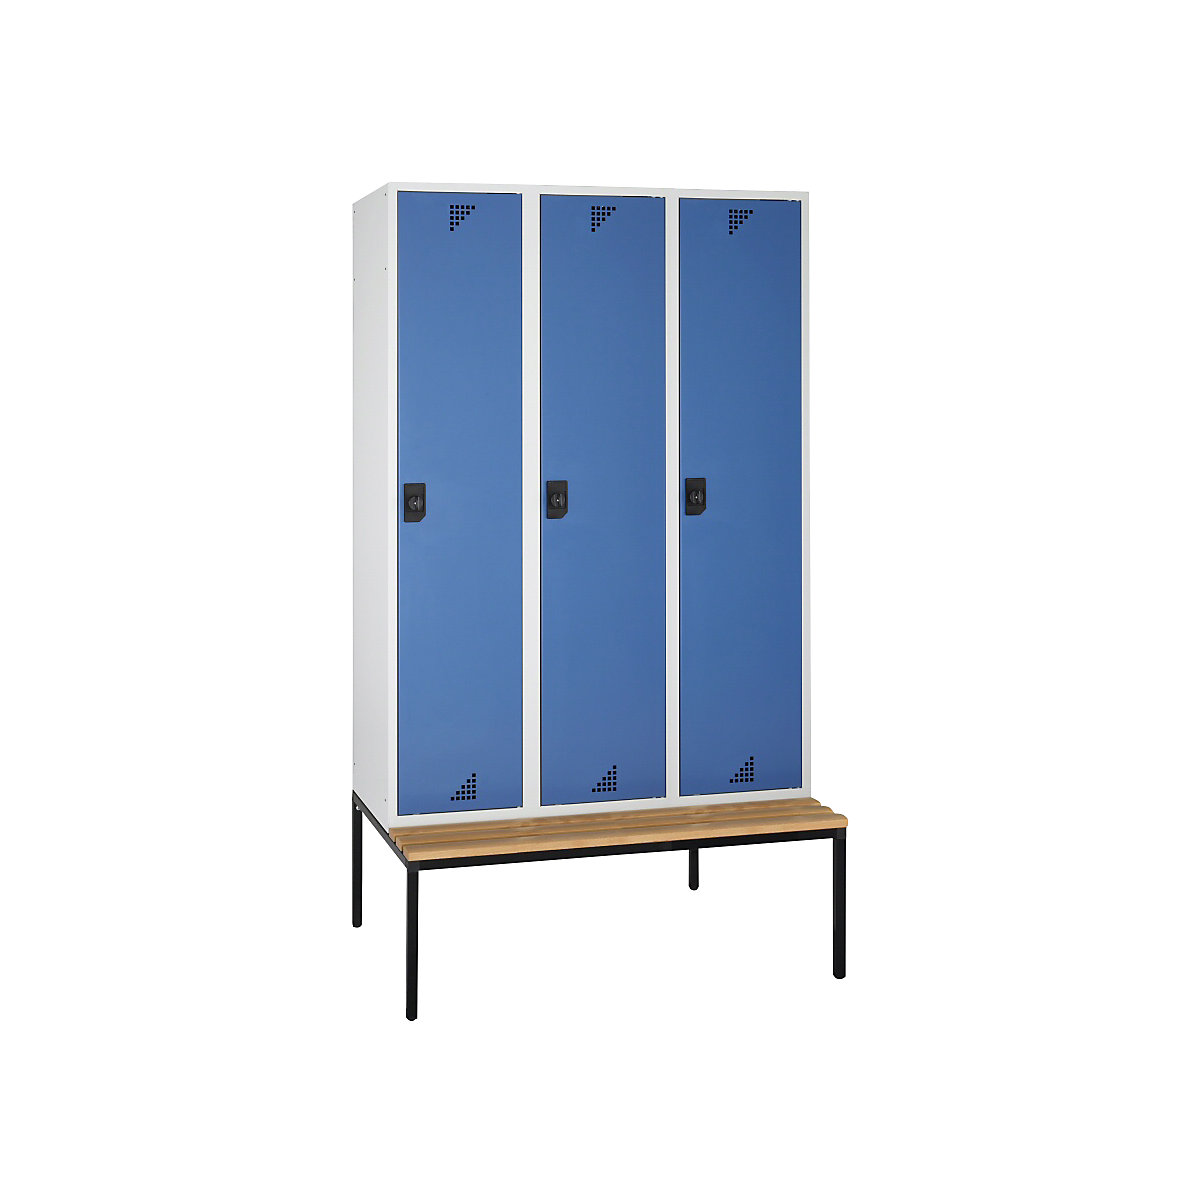 Multi-purpose cupboard and cloakroom locker – eurokraft pro, with seat bench, 3 compartments, width 1200 mm, brilliant blue doors-4